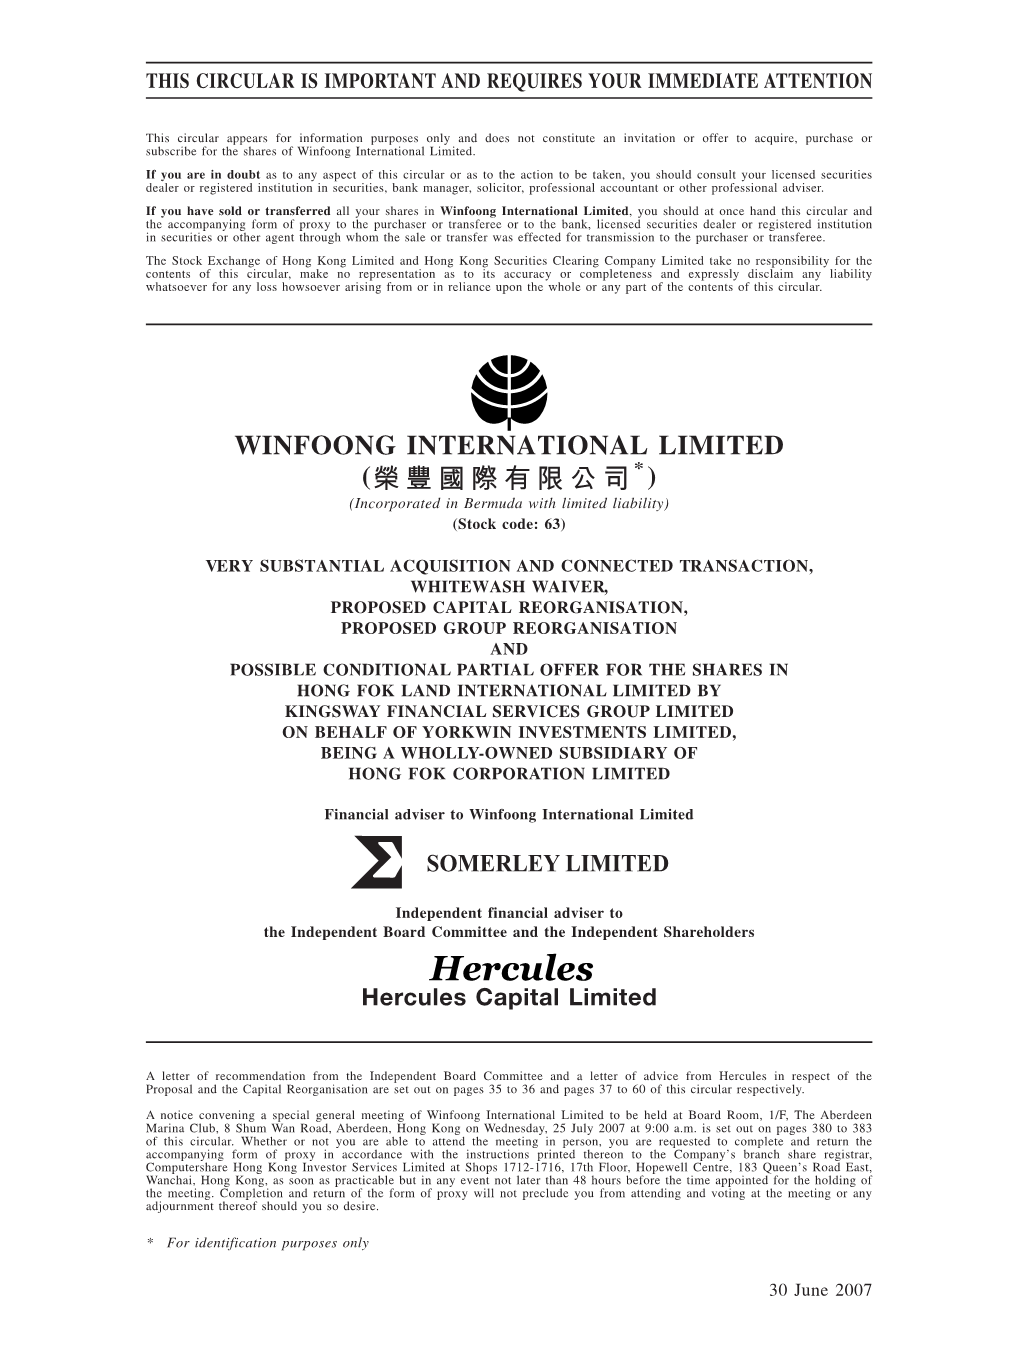 WINFOONG INTERNATIONAL LIMITED ( * ) (Incorporated in Bermuda with Limited Liability) (Stock Code: 63)